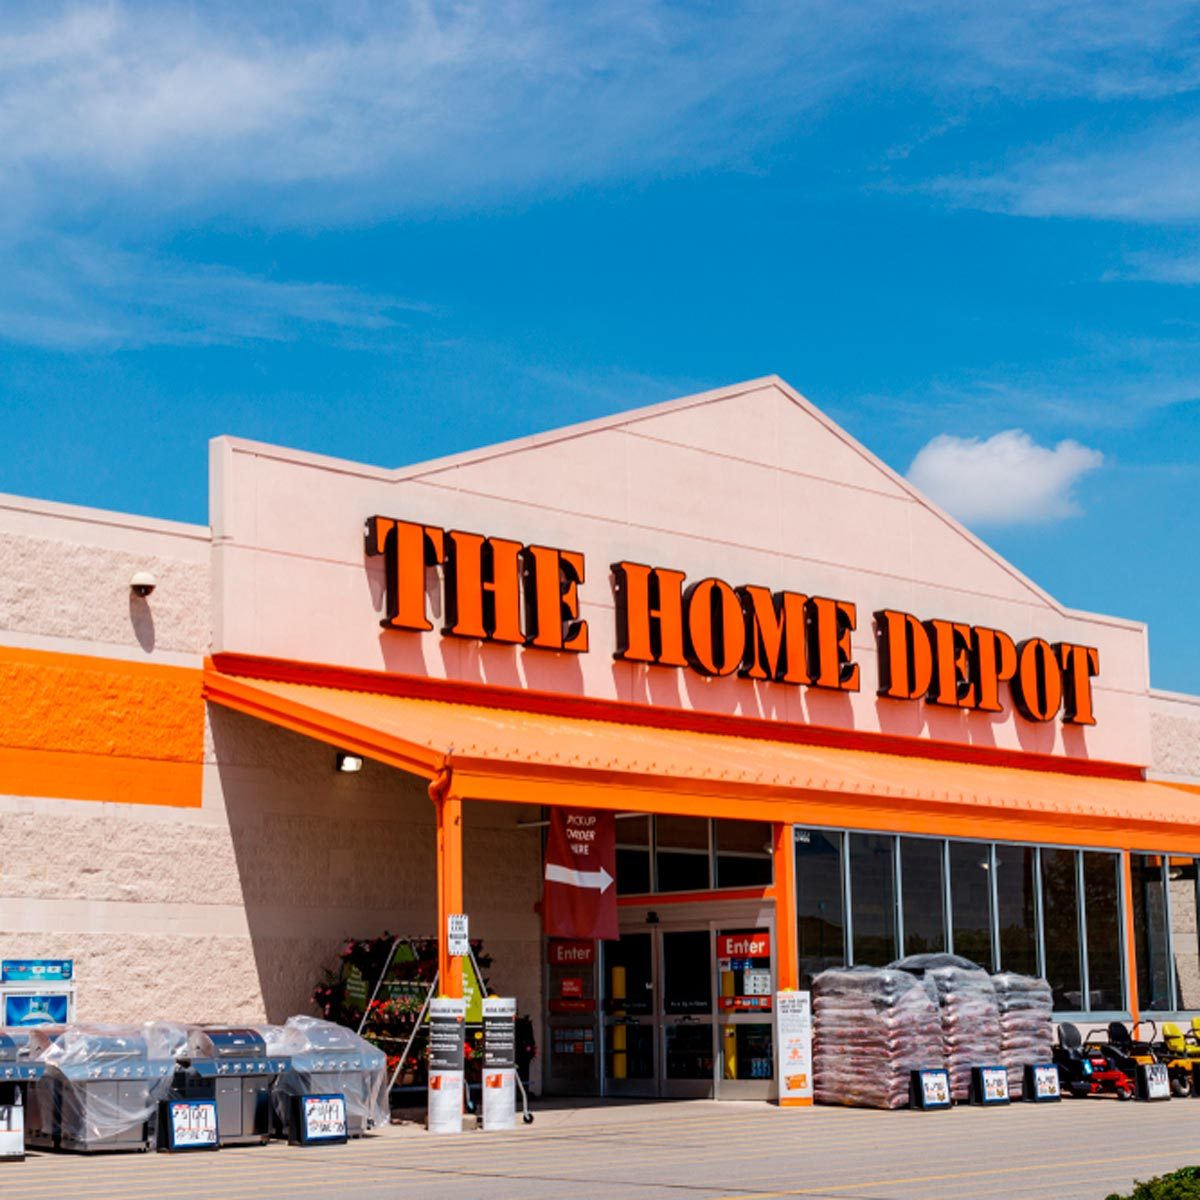 The Right Time To Buy Paint At Home Depot